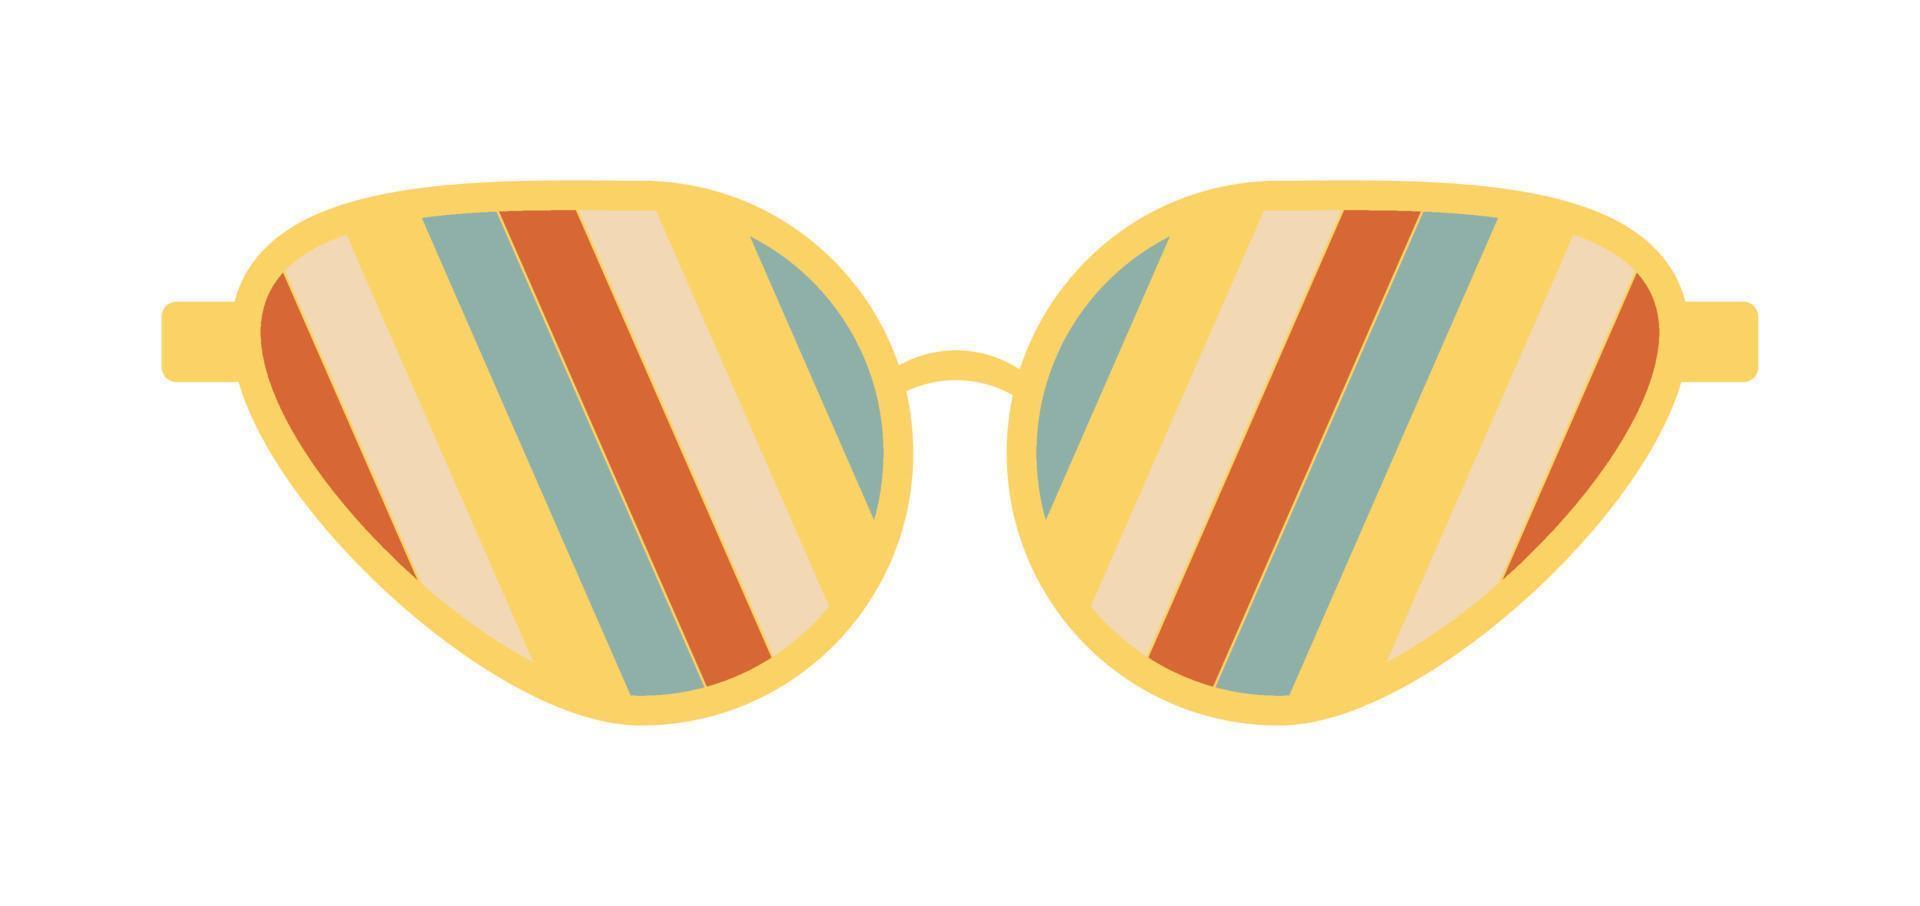 Psychedelic sunglasses in the style of the 70s. Retro groovy graphic elements of glasses with rainbow, lines and waves. vector